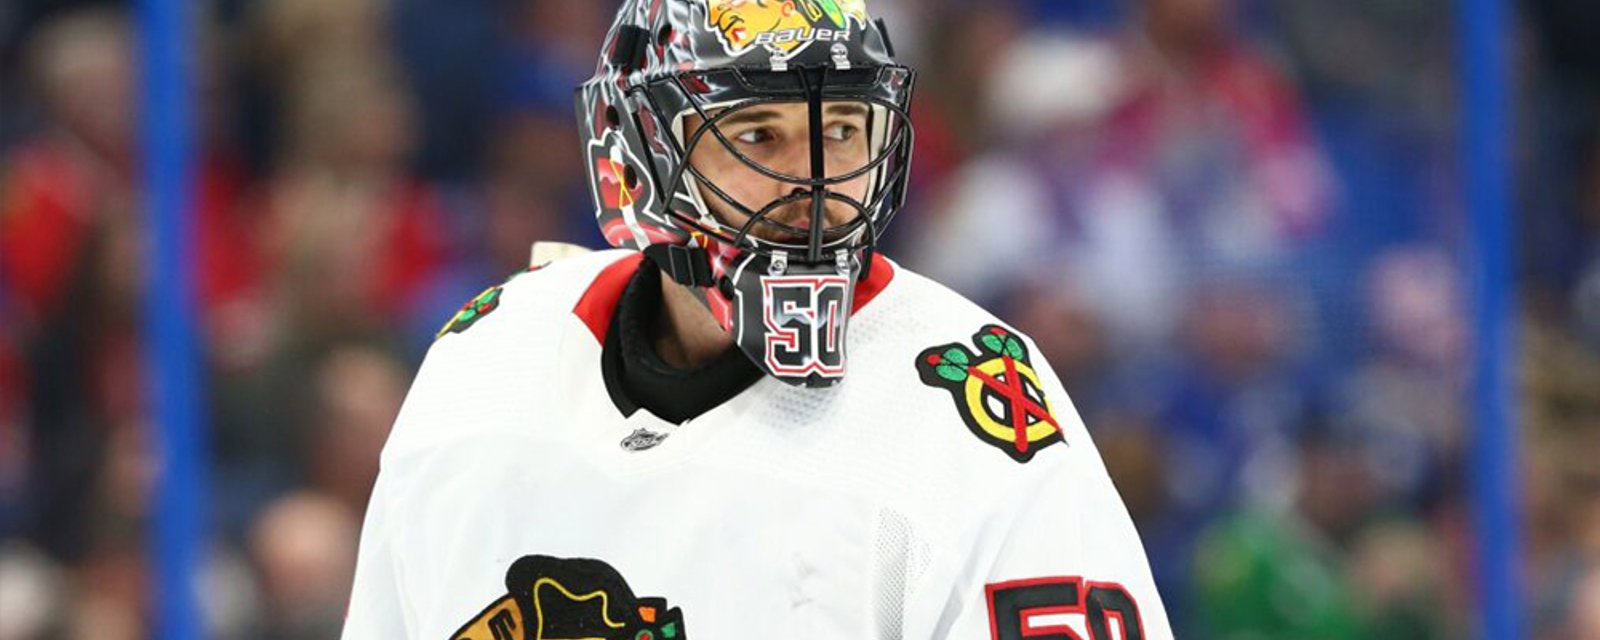 Report: It appears Corey Crawford is done with the Blackhawks